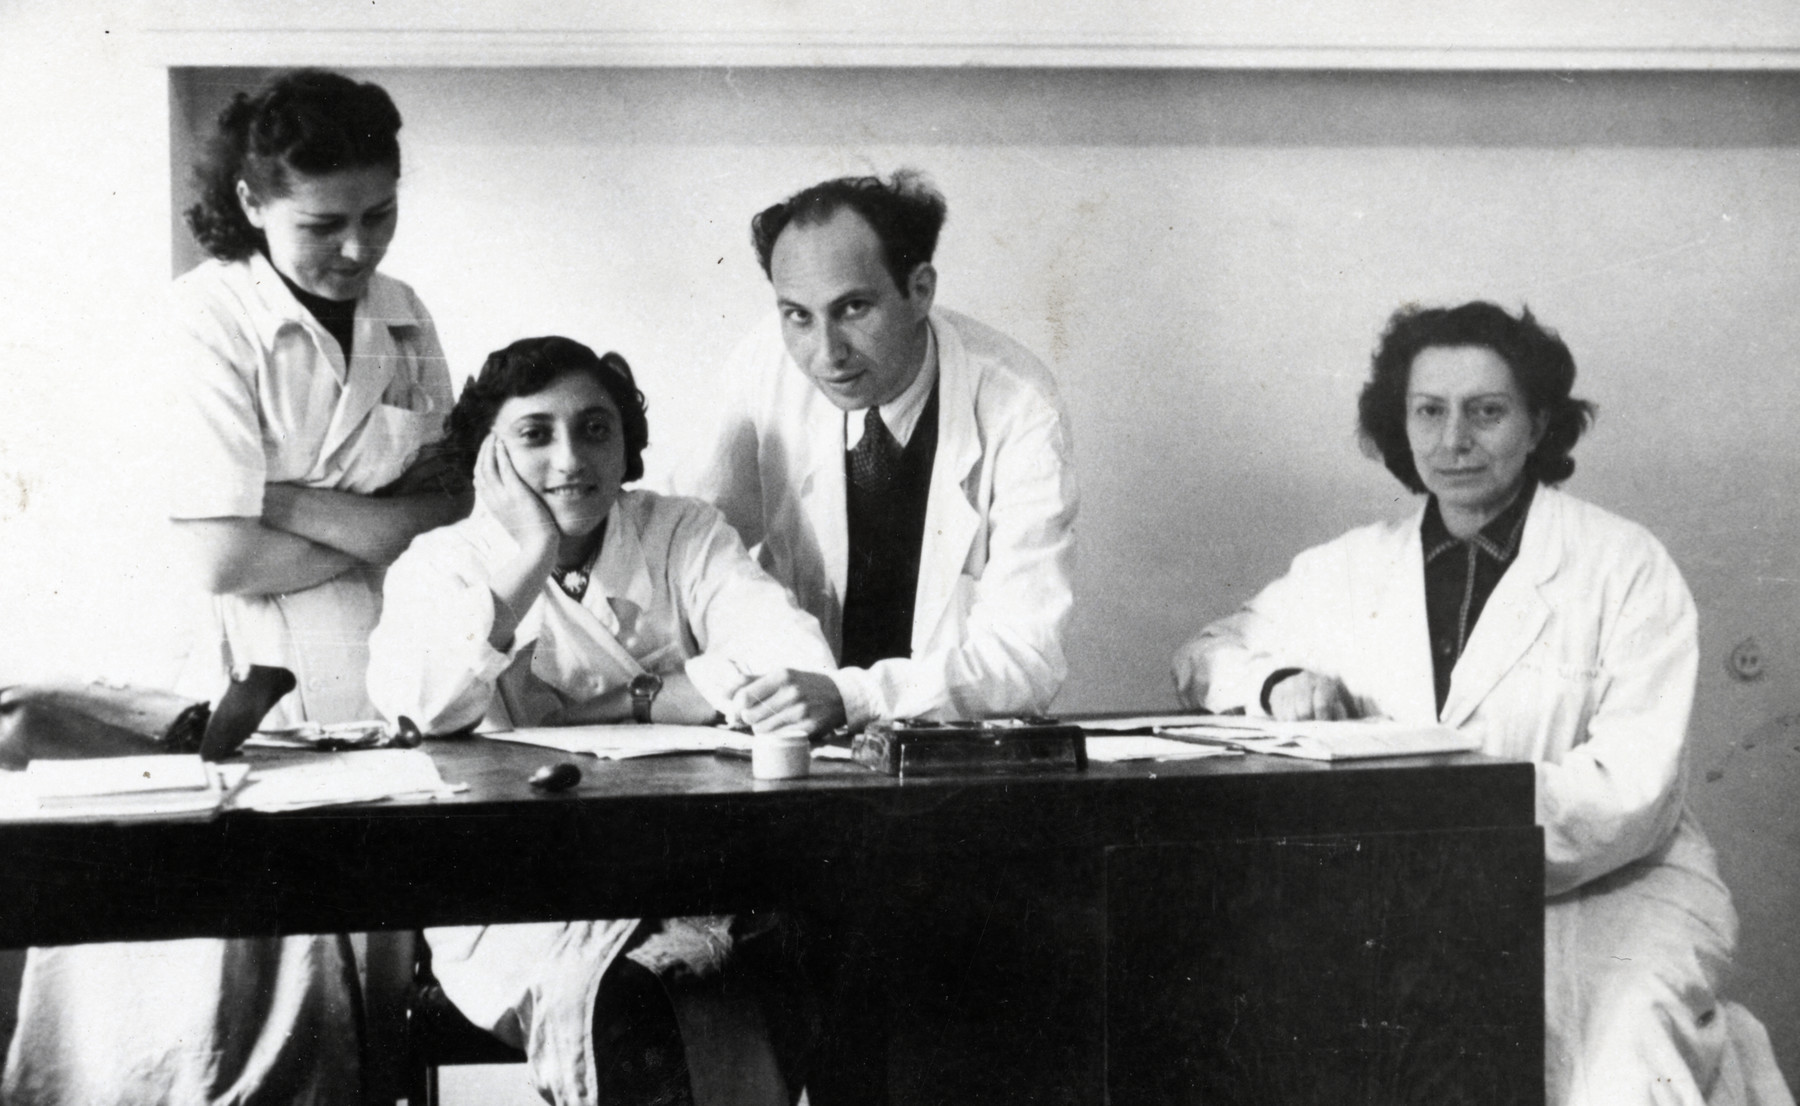 Group portrait of four students at the Bucharest Medical School.

Thea Kollenberg is pictured second from the left.